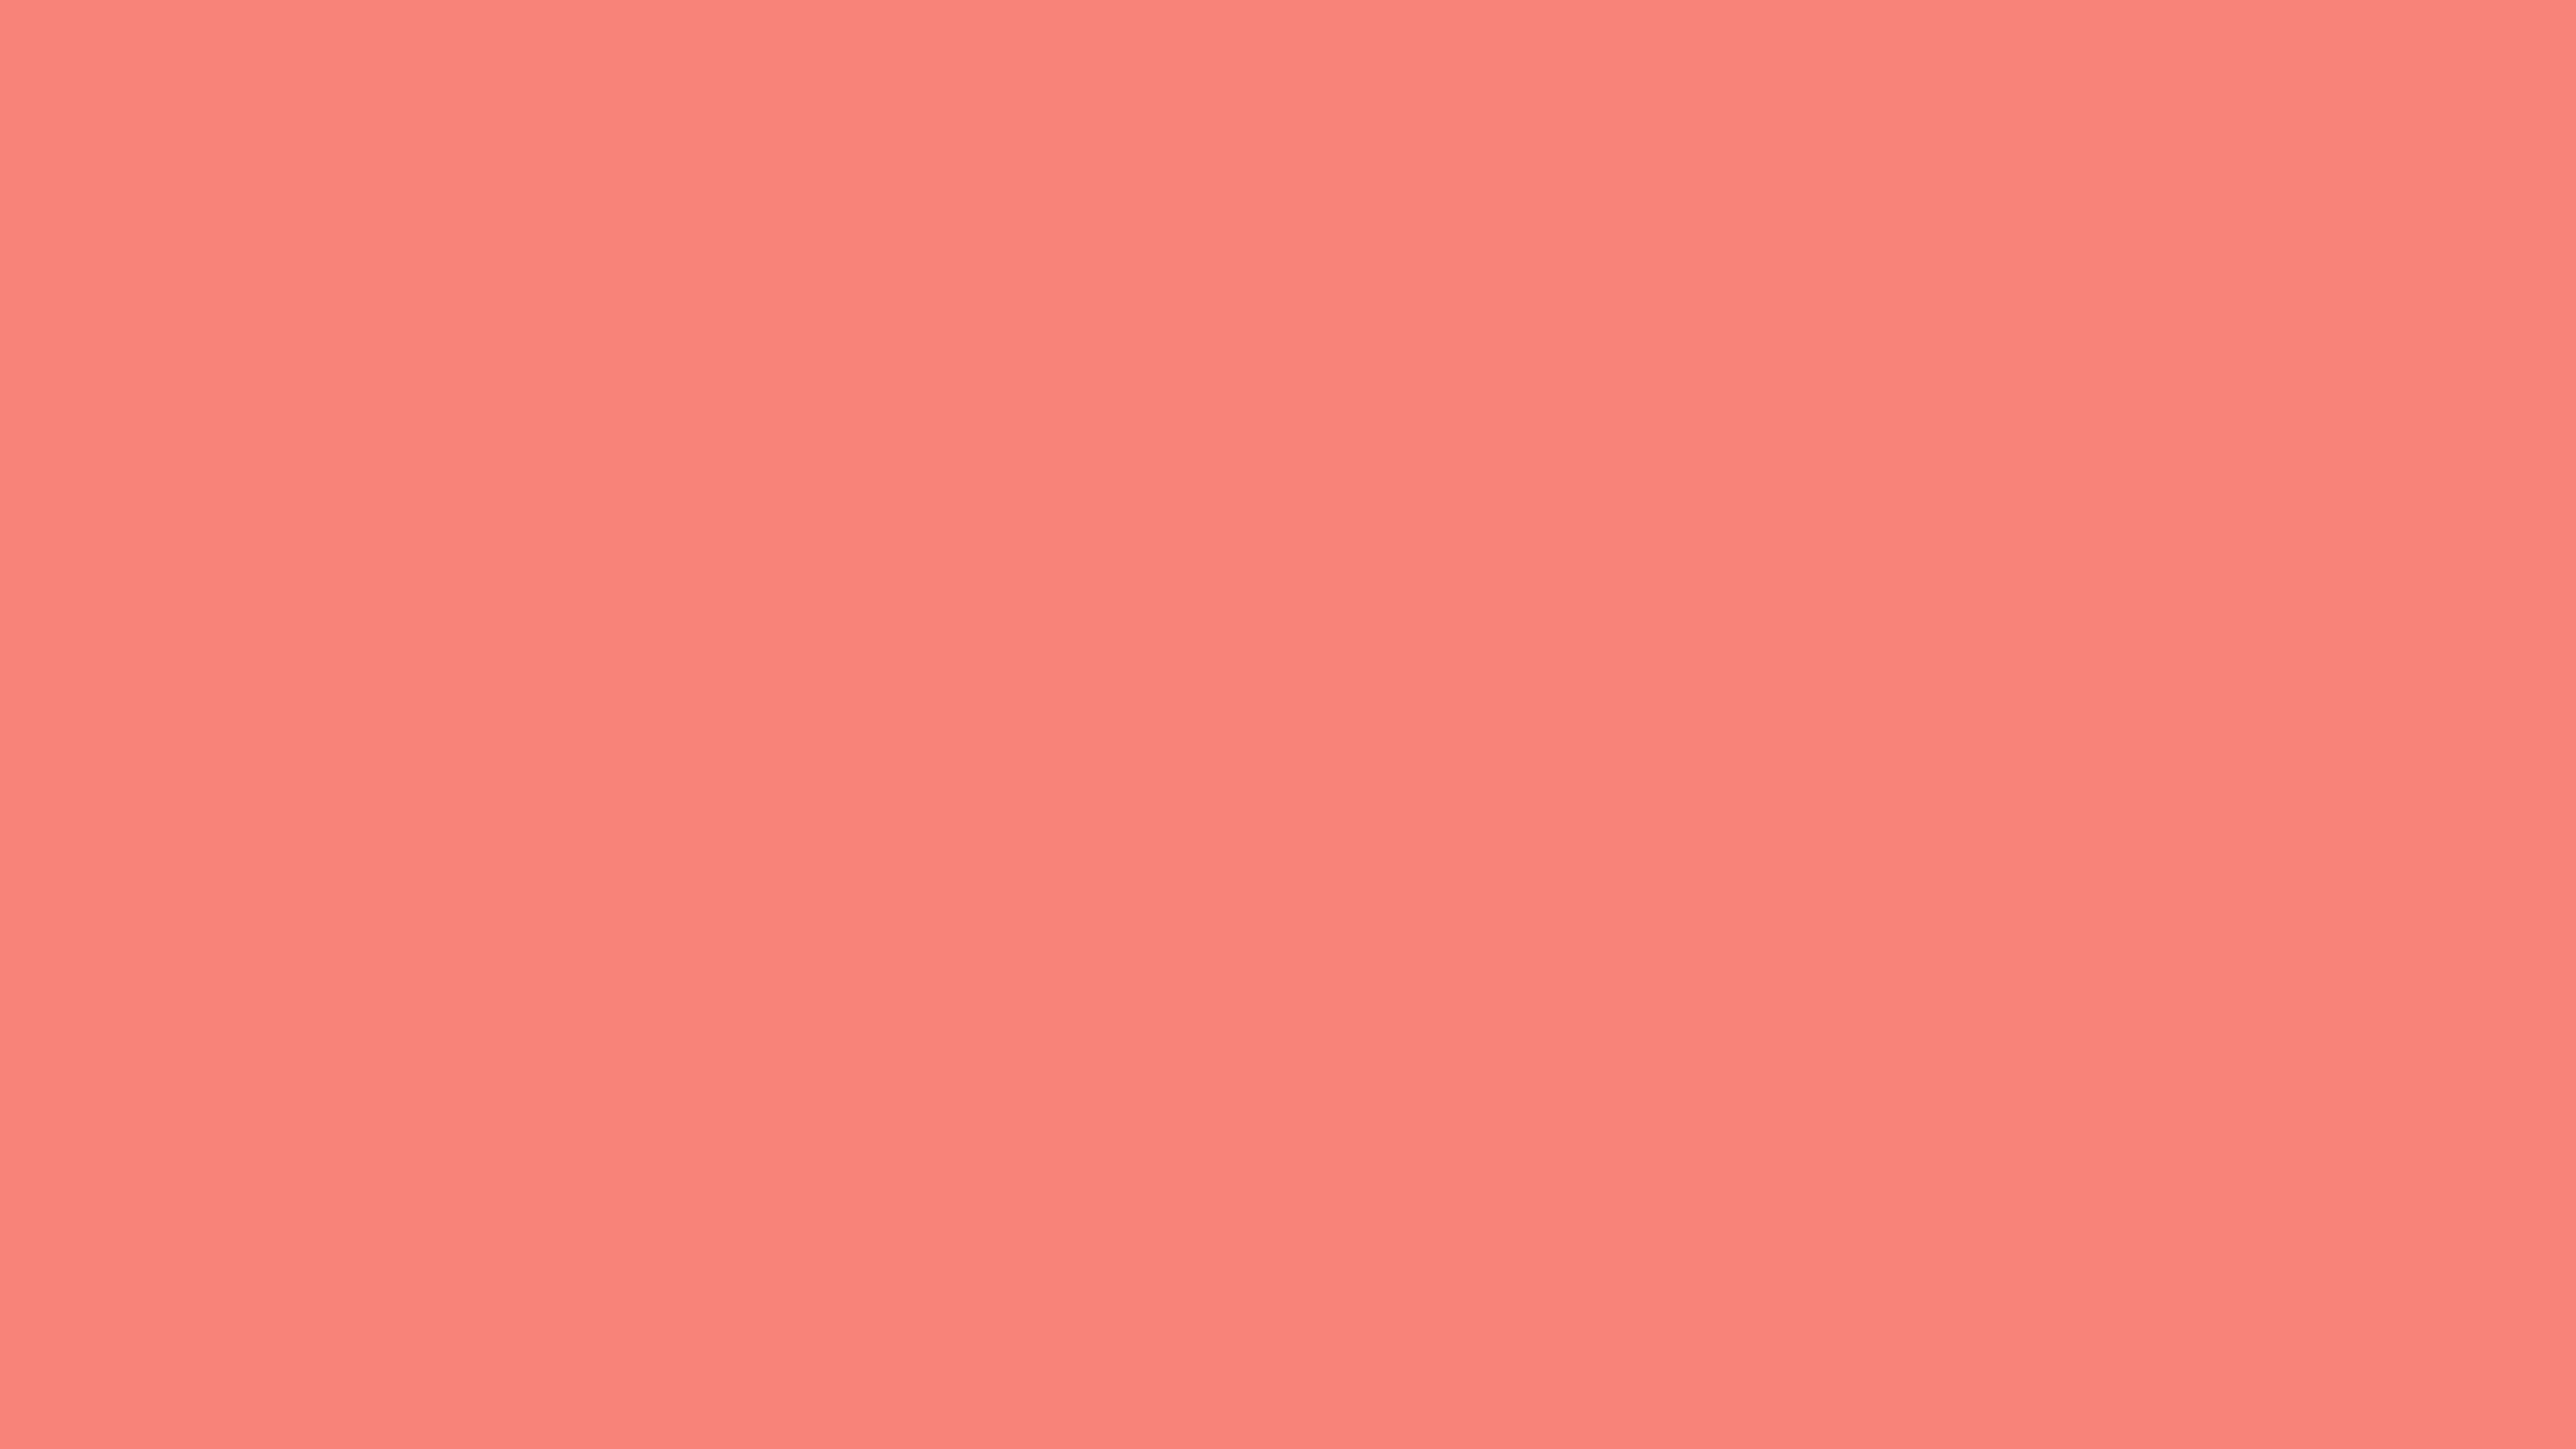 7680x4320 Coral Pink Solid Color Background